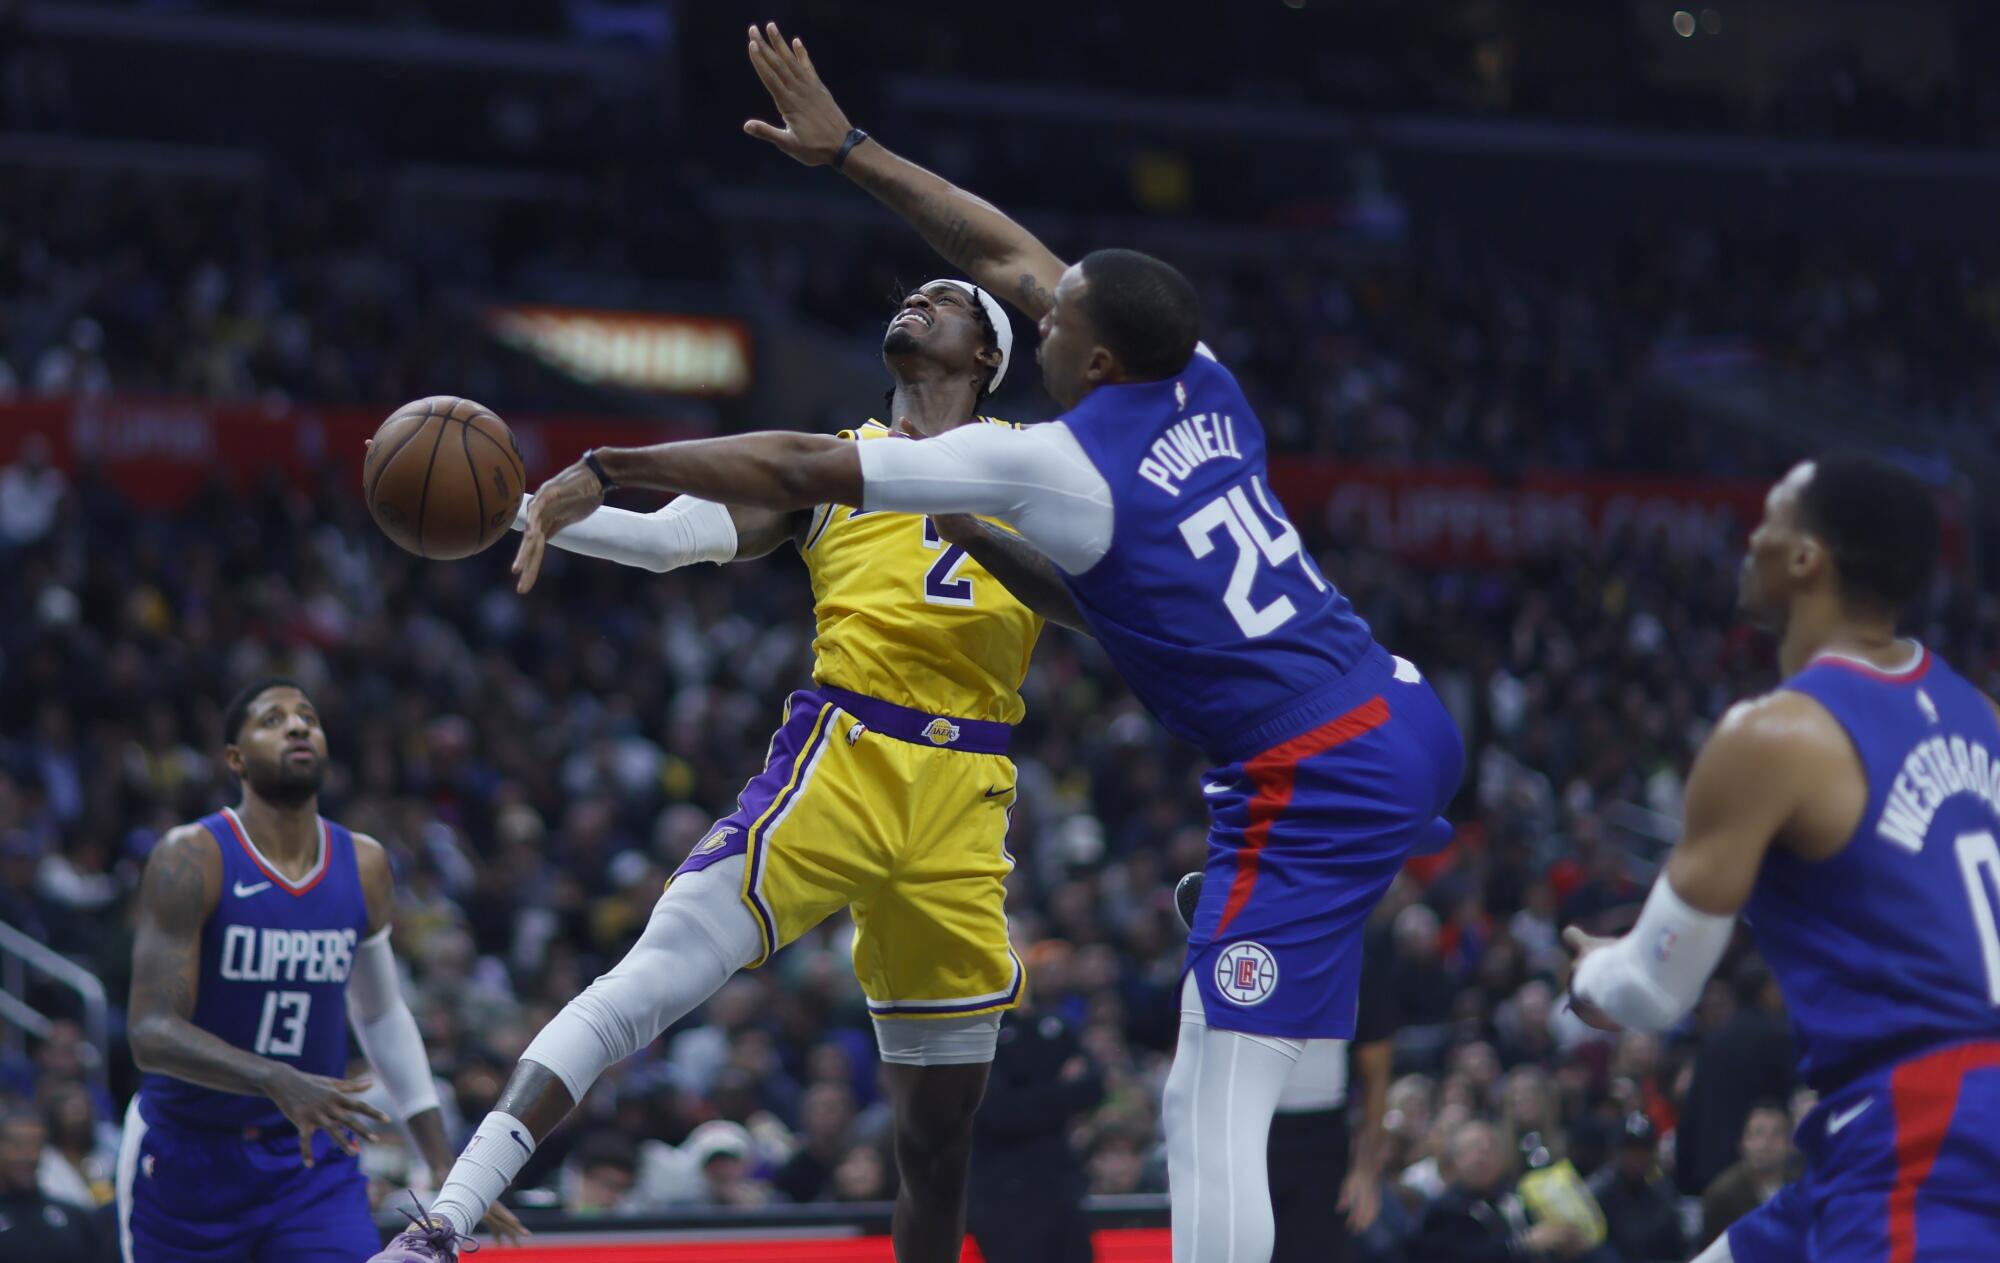 Clippers guard Norman Powell, center, blocks a shot by Lakers forward Jarred Vanderbilt during a game Jan. 23.